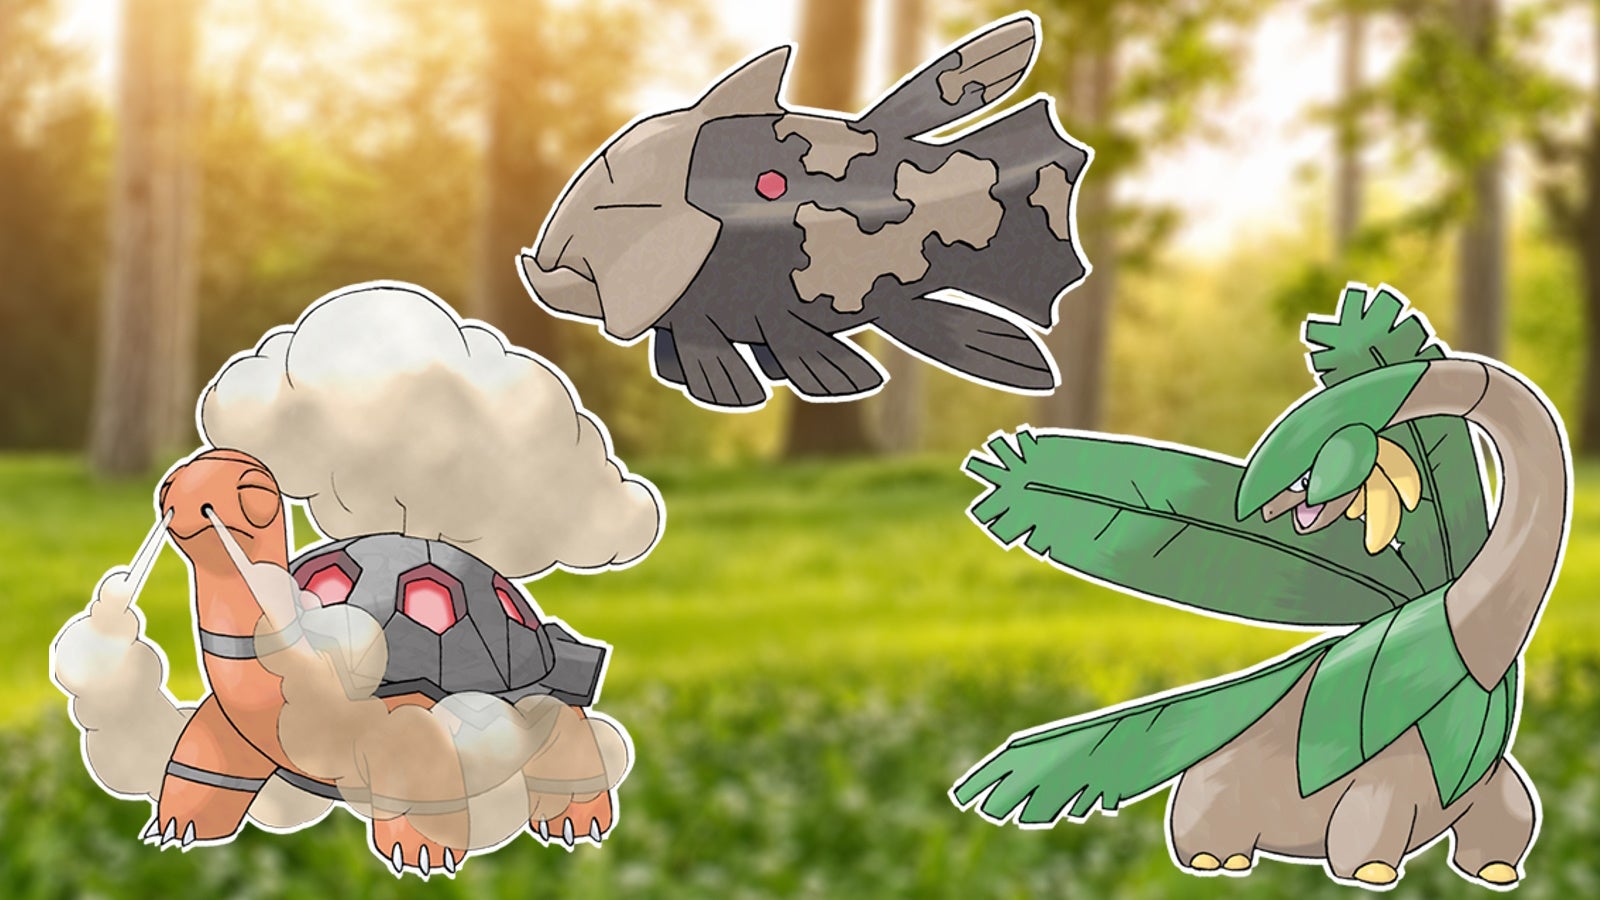 Image for How to get Torkoal, Relicanth, and Tropius during Go Tour Hoenn in Pokémon Go